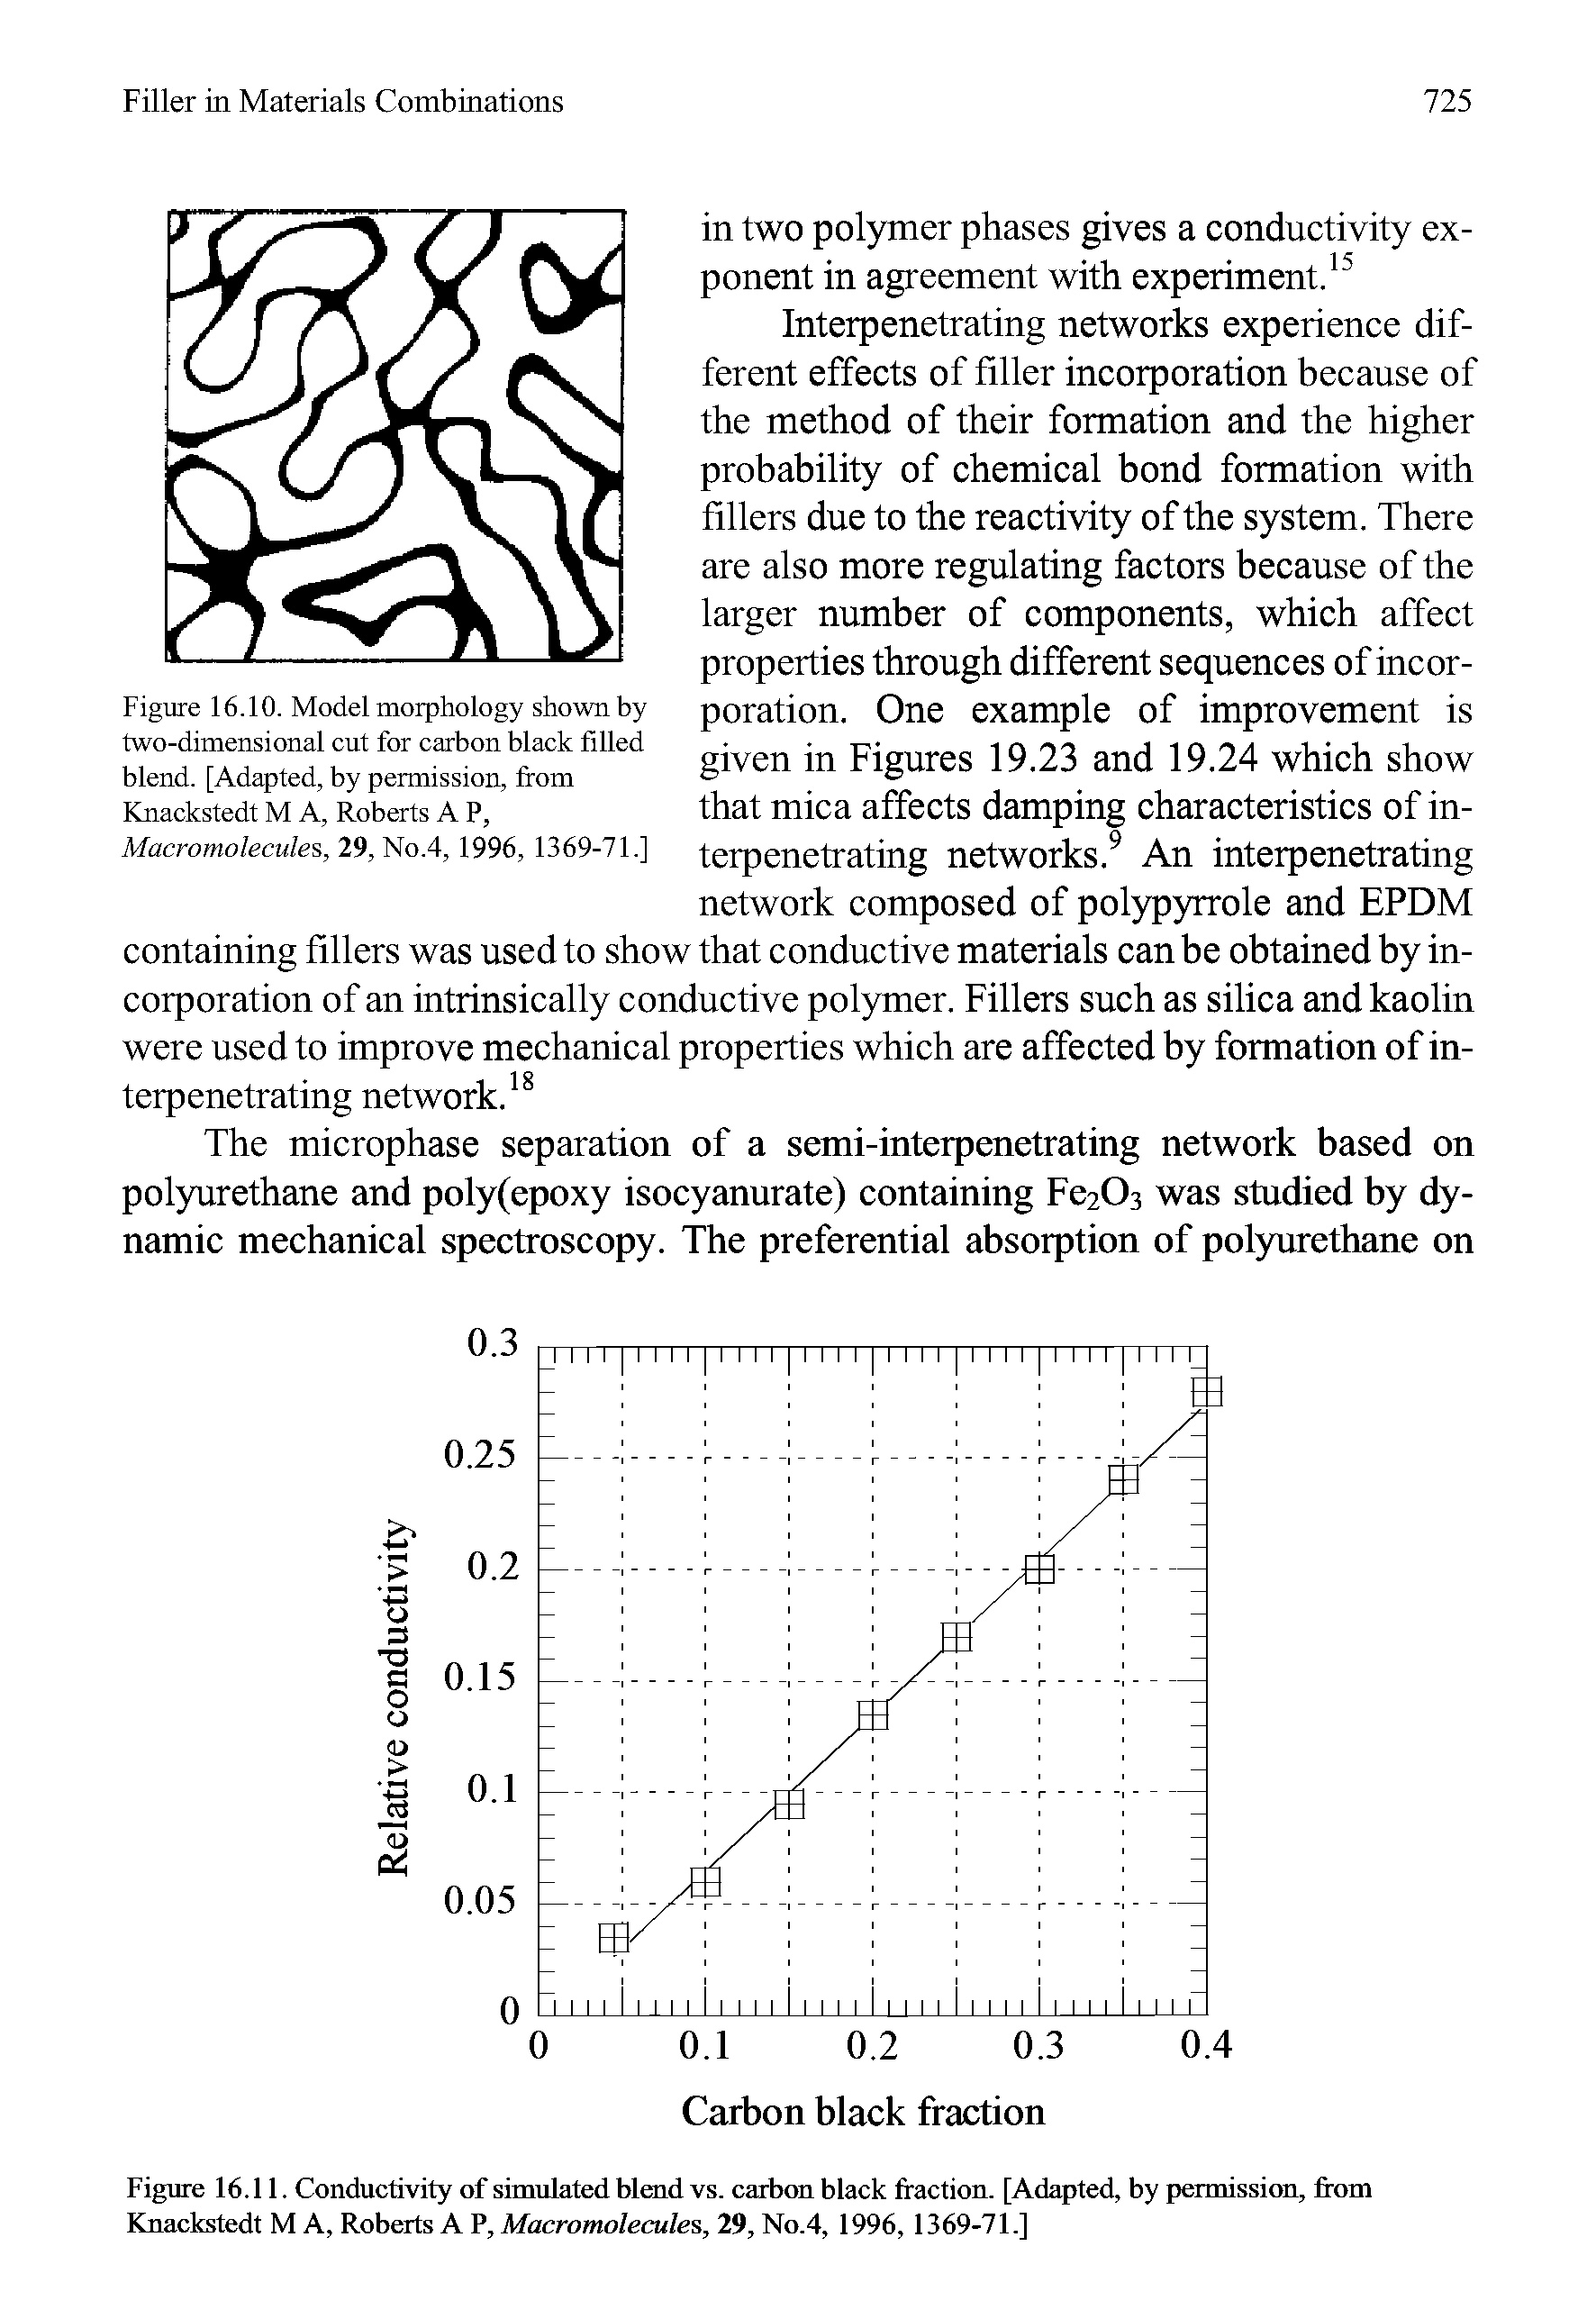 Figure 16.10. Model morphology shown by two-dimensional cut for carbon black filled blend. [Adapted, by permission, from Knackstedt M A, Roberts A P, Macromolecules, 29, No,4, 1996, 1369-71.]...